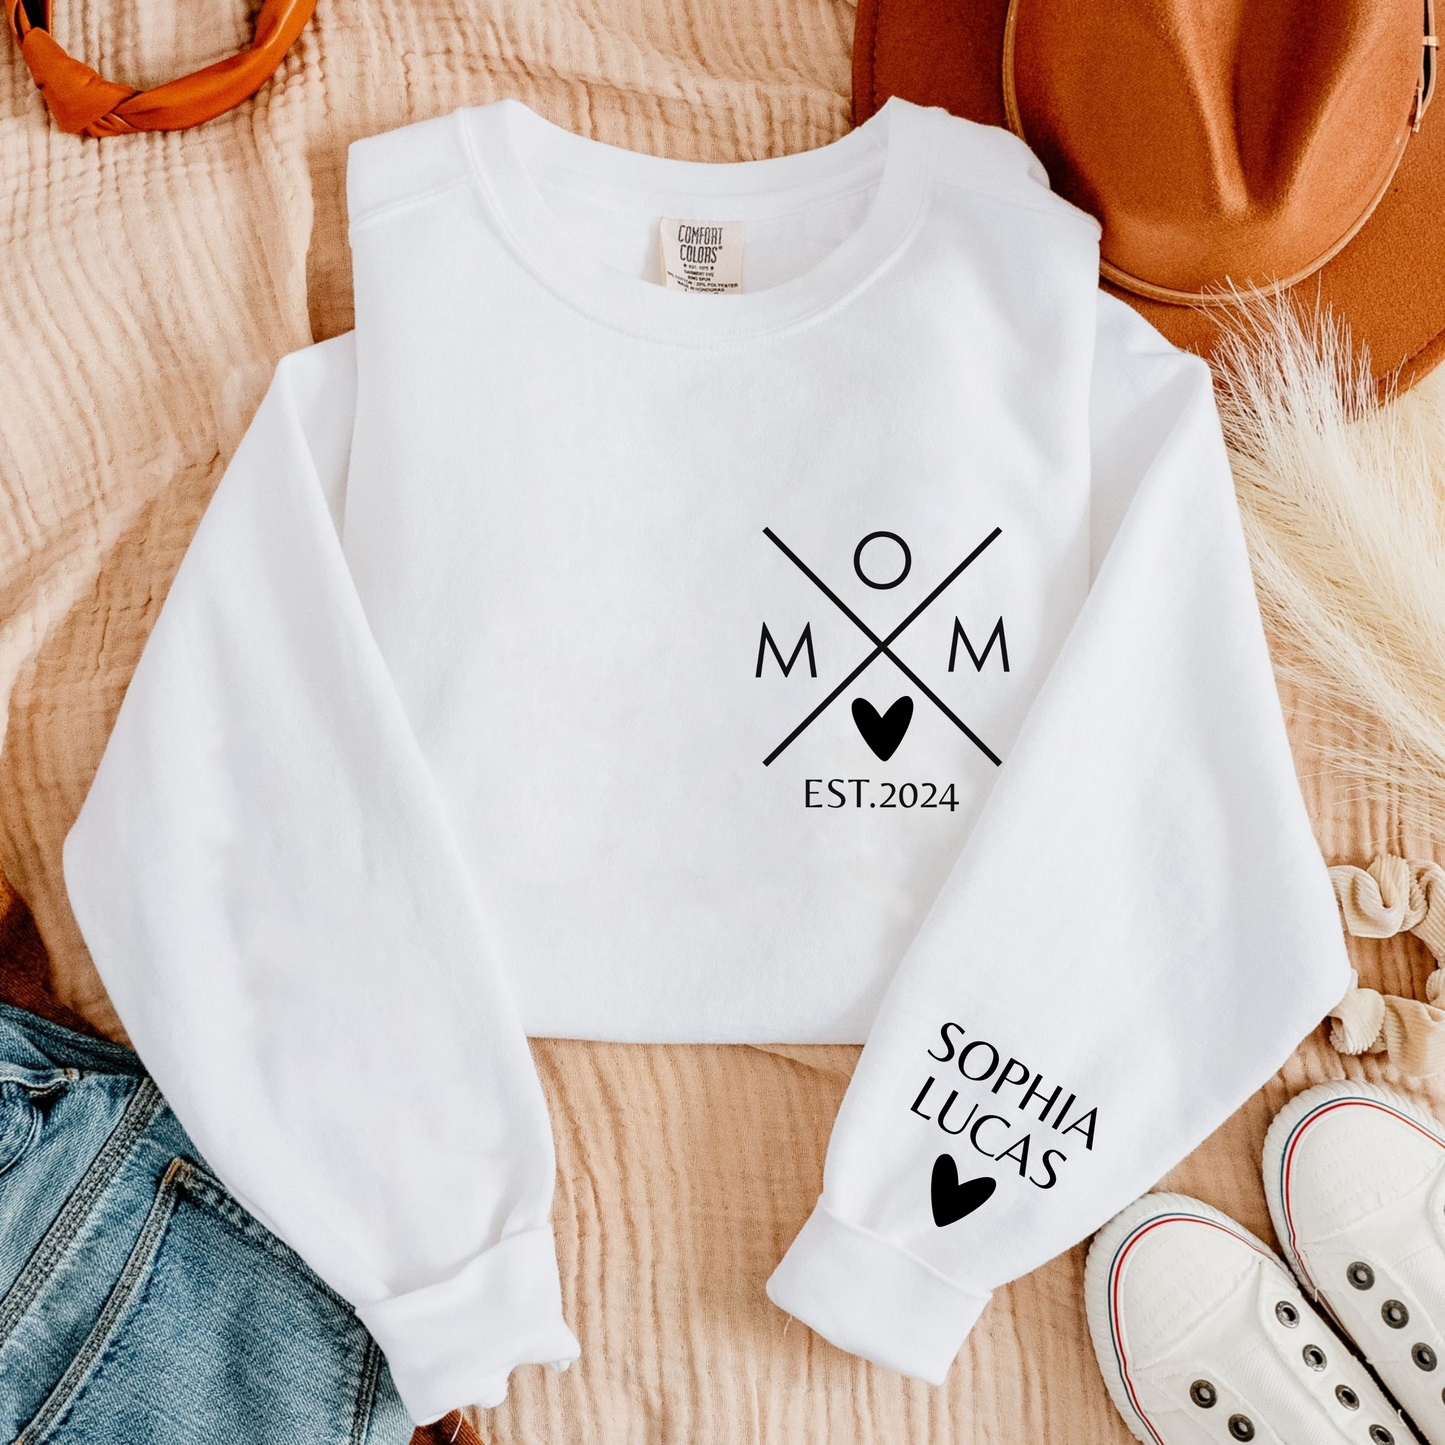 Mom Legacy Shirt - Personalized with Special Years and Children’s Names